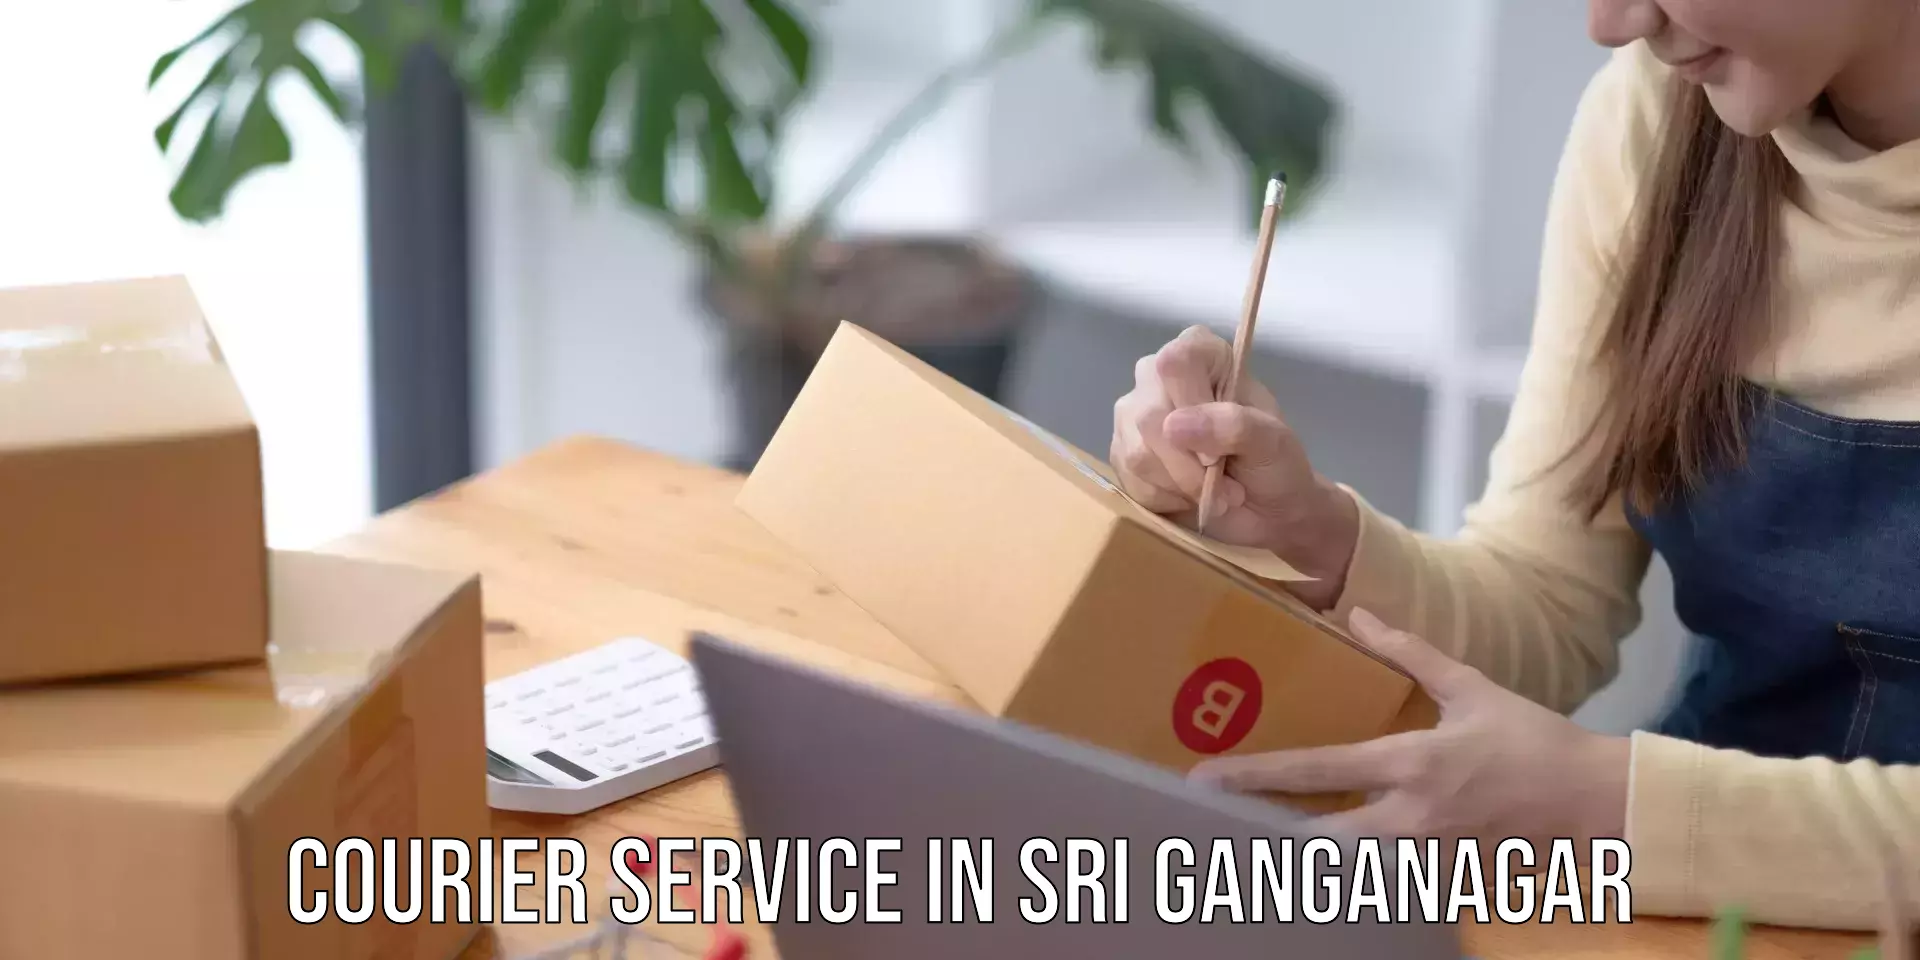 Express delivery solutions in Sri Ganganagar